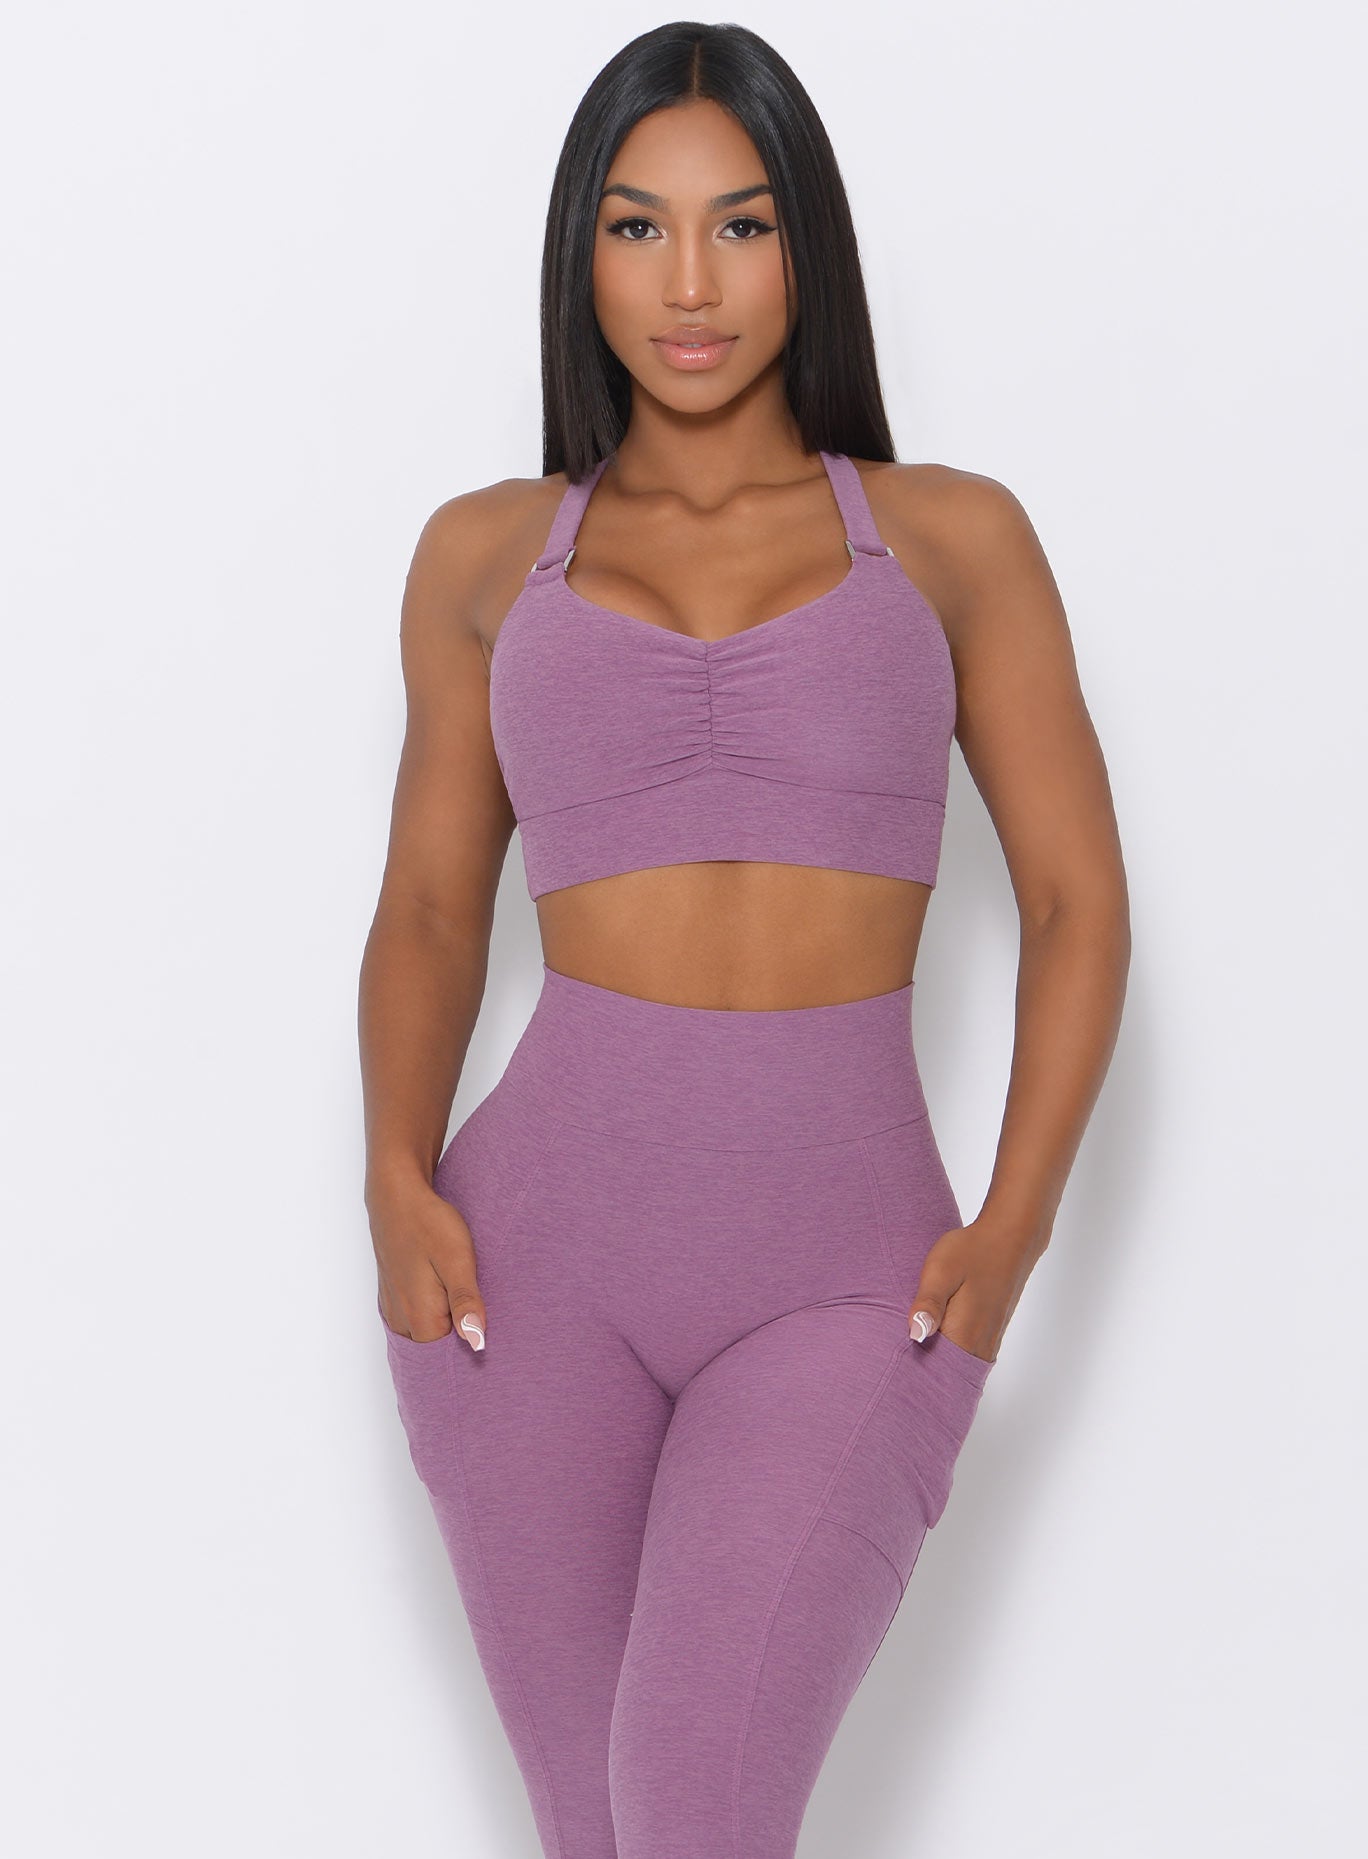 Front profile view of the model wearing our perfection sports bra in lavender and a matching leggings